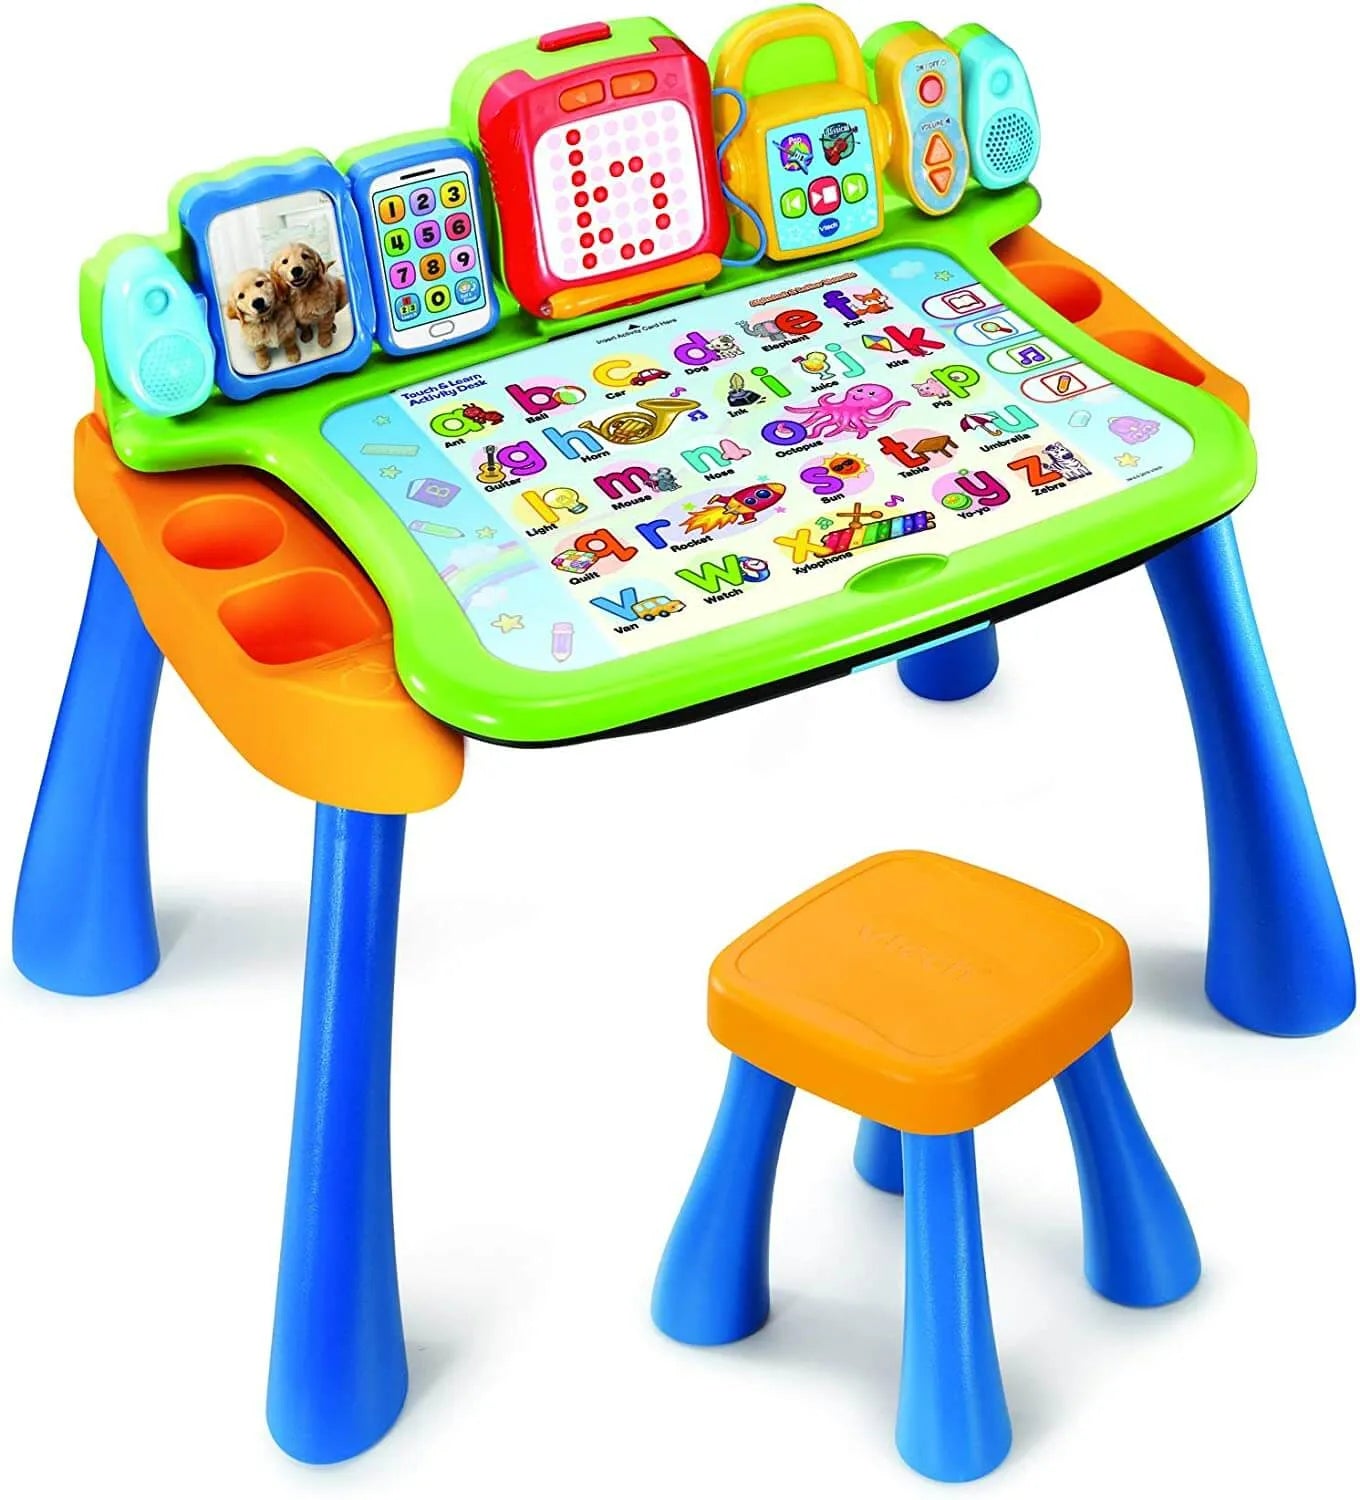 Shop Touch & Learn Activity Desk - Imaginative & Role Playing Toy for kids